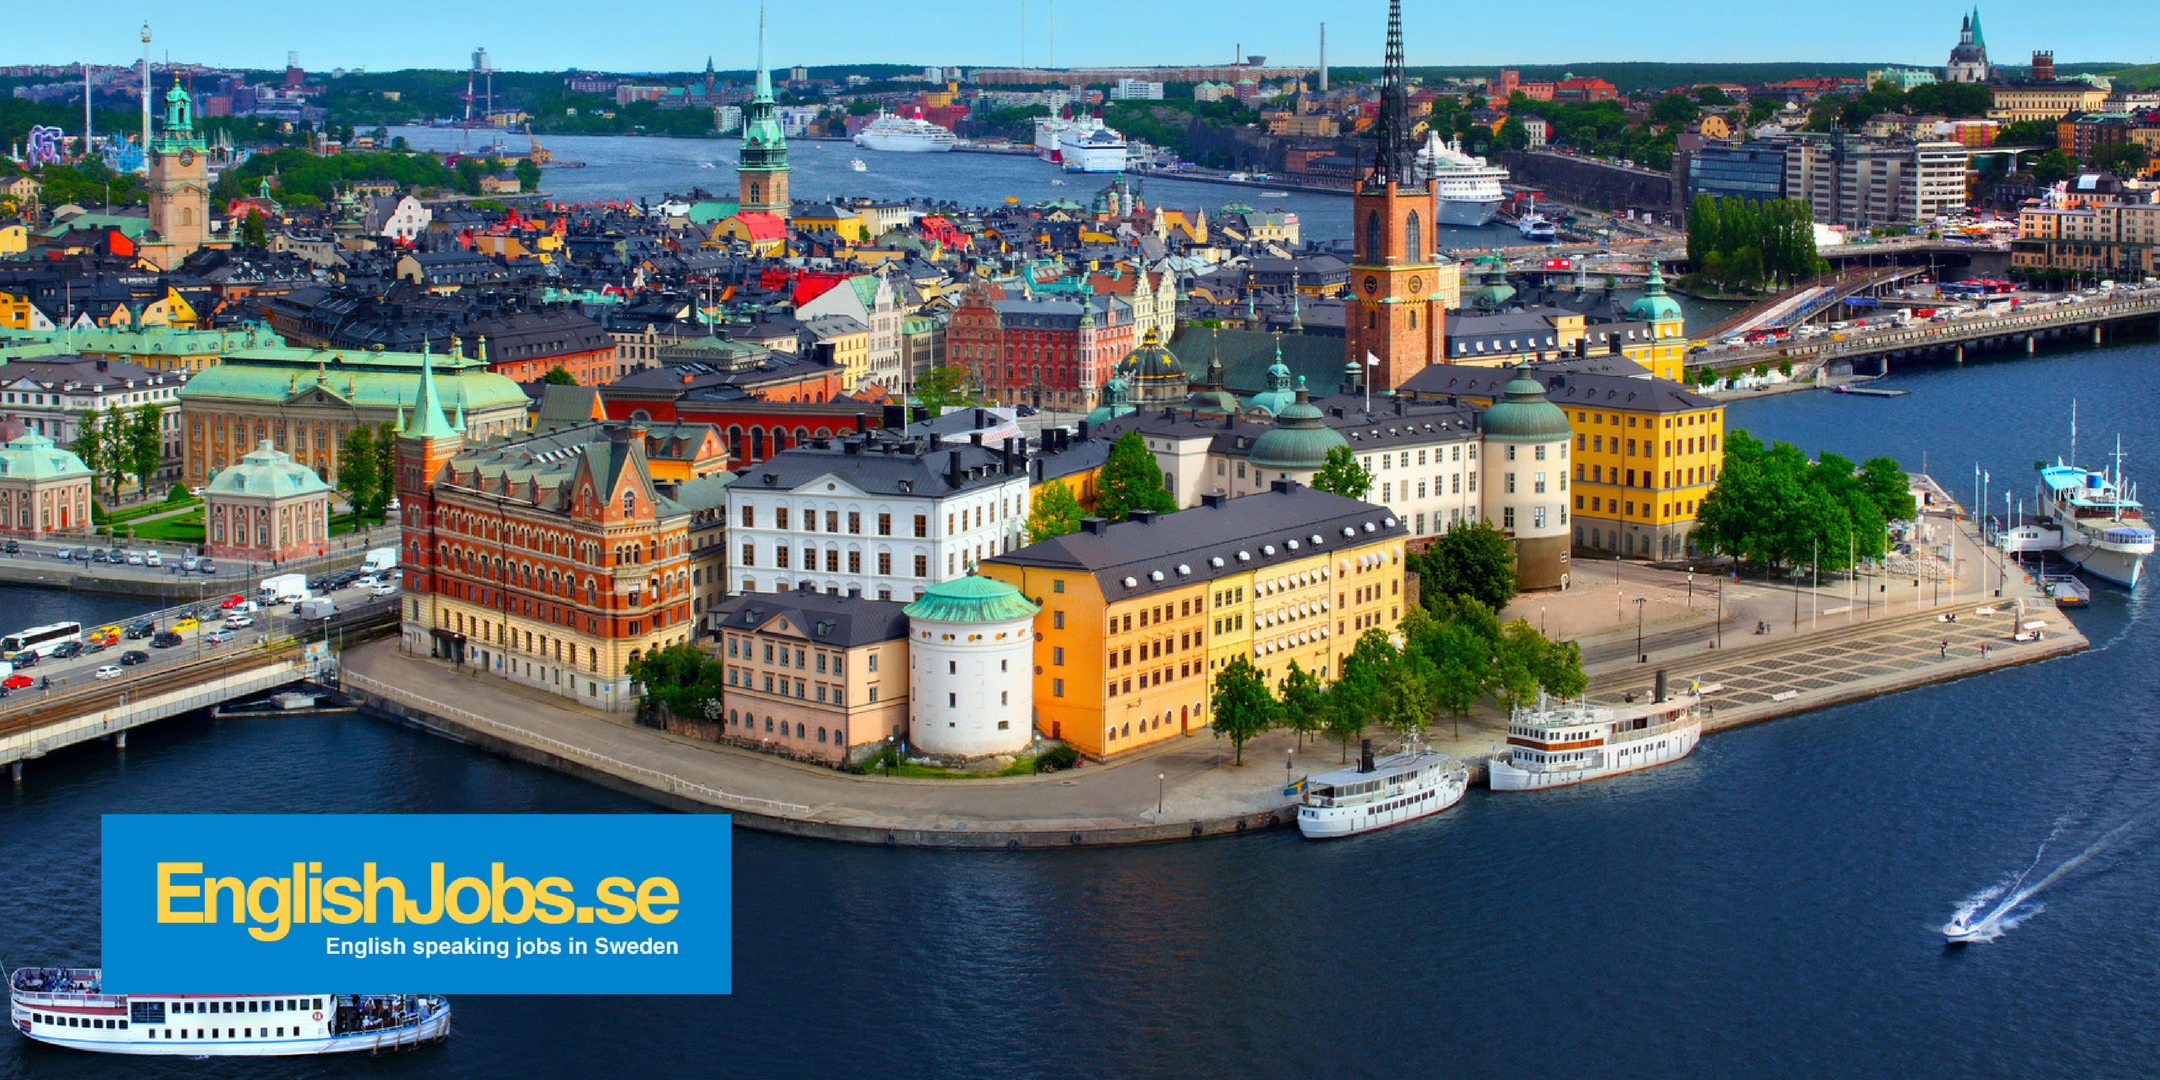 Work in Europe (Sweden, Denmark, Germany) - Your job search from San Diego to Stockholm